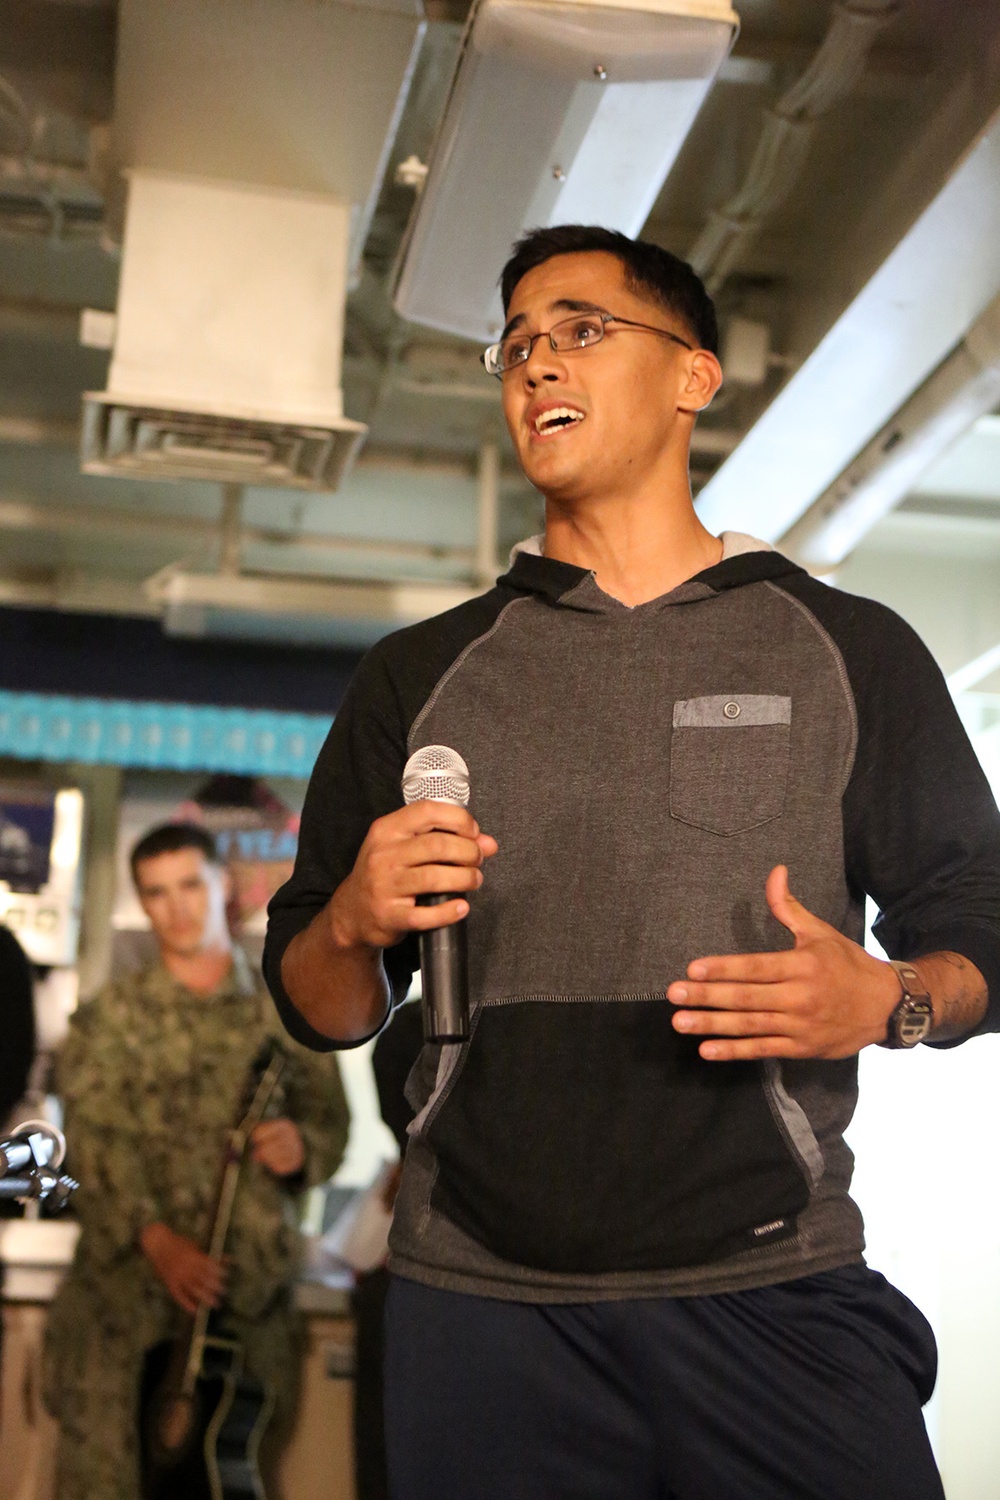 USS Comstock rings in the New Year with an open mic night